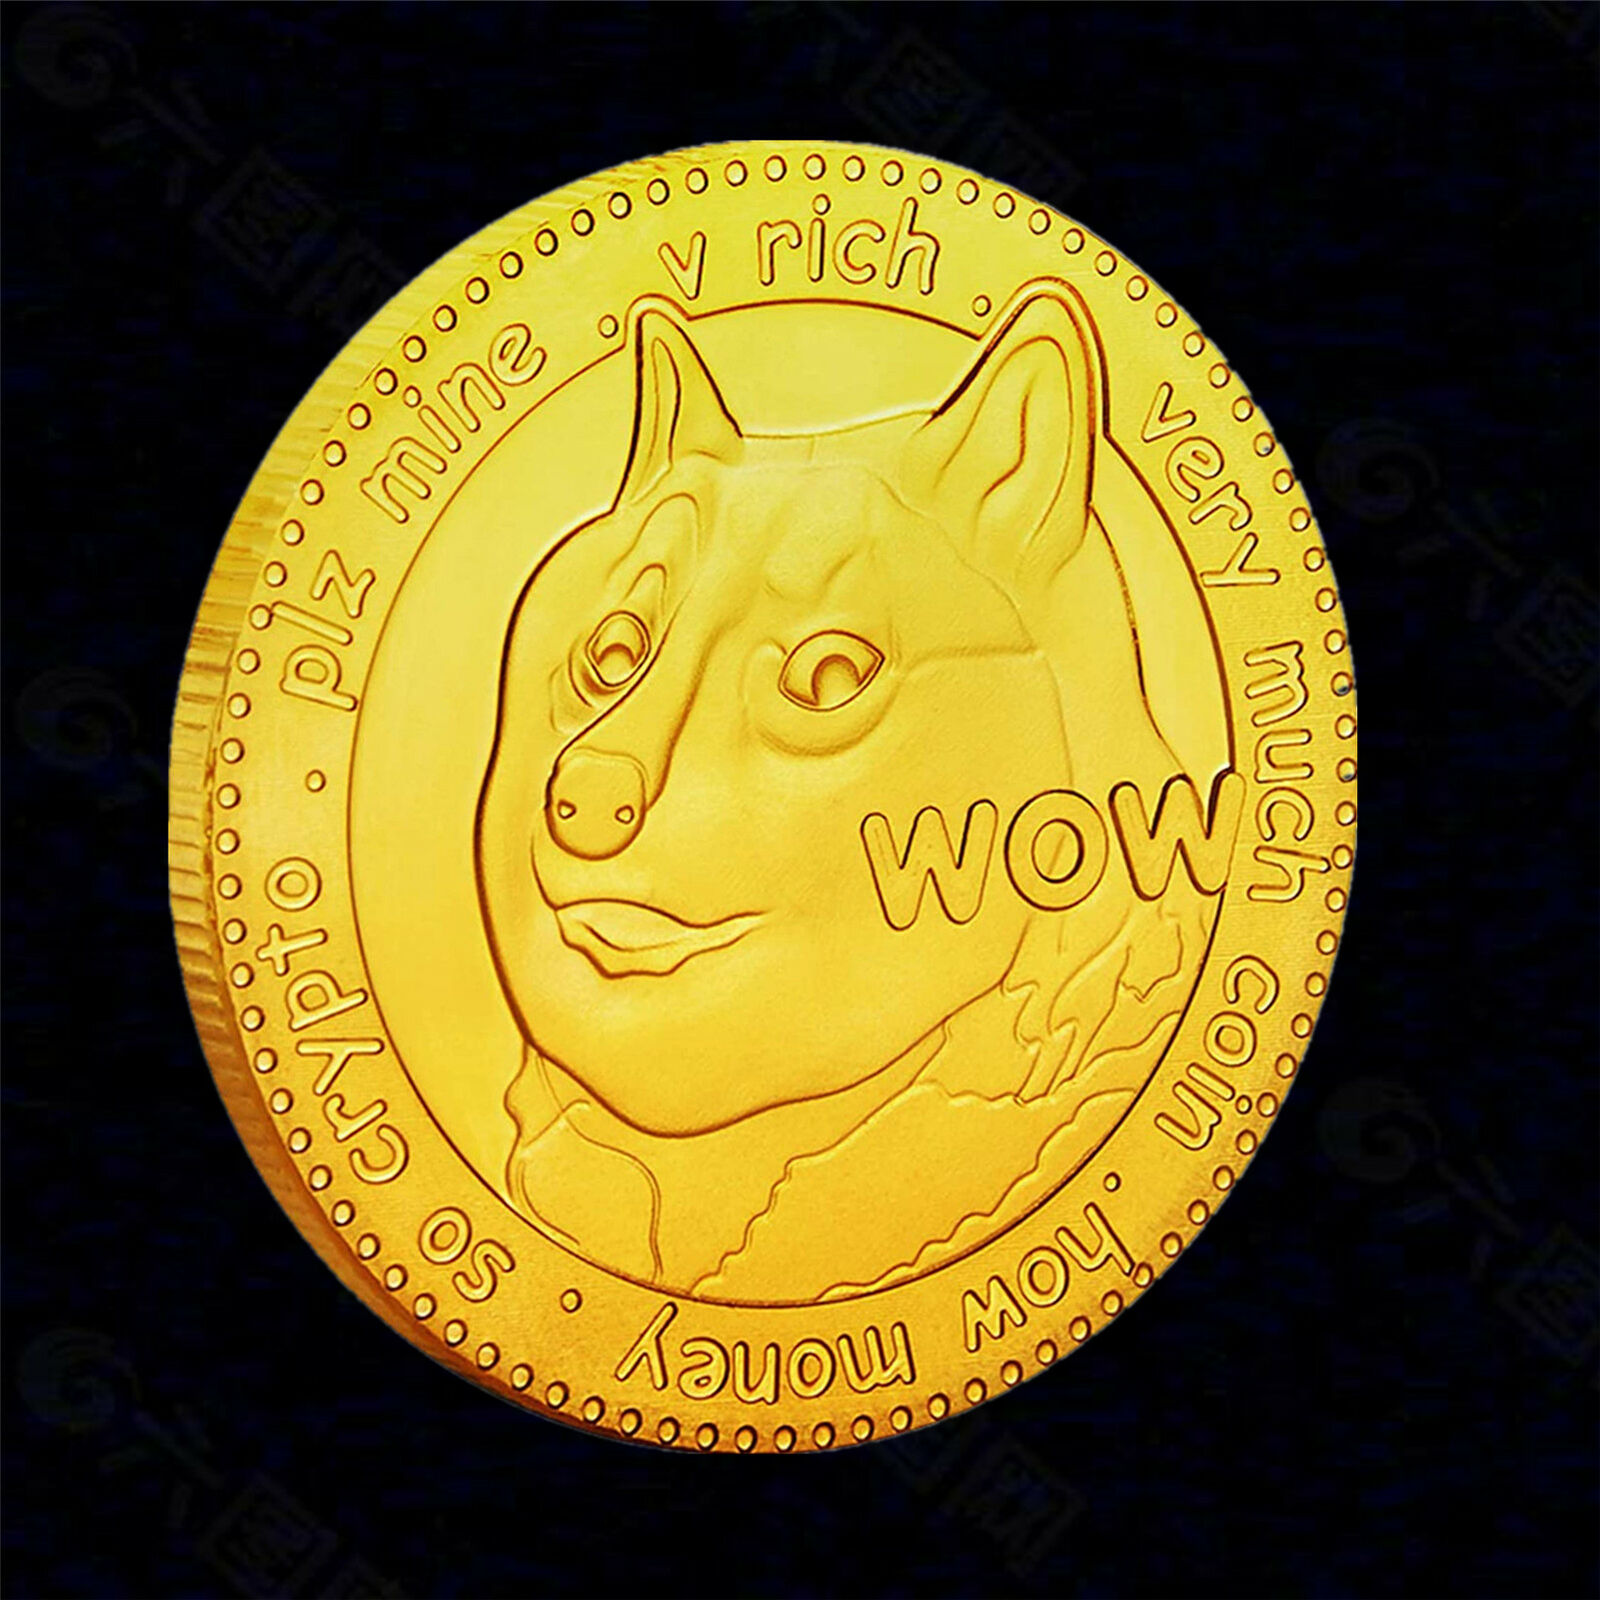 1x Dogecoin Coins Commemorative 2021 Collectors Gold Plated Doge Coins USA Stock